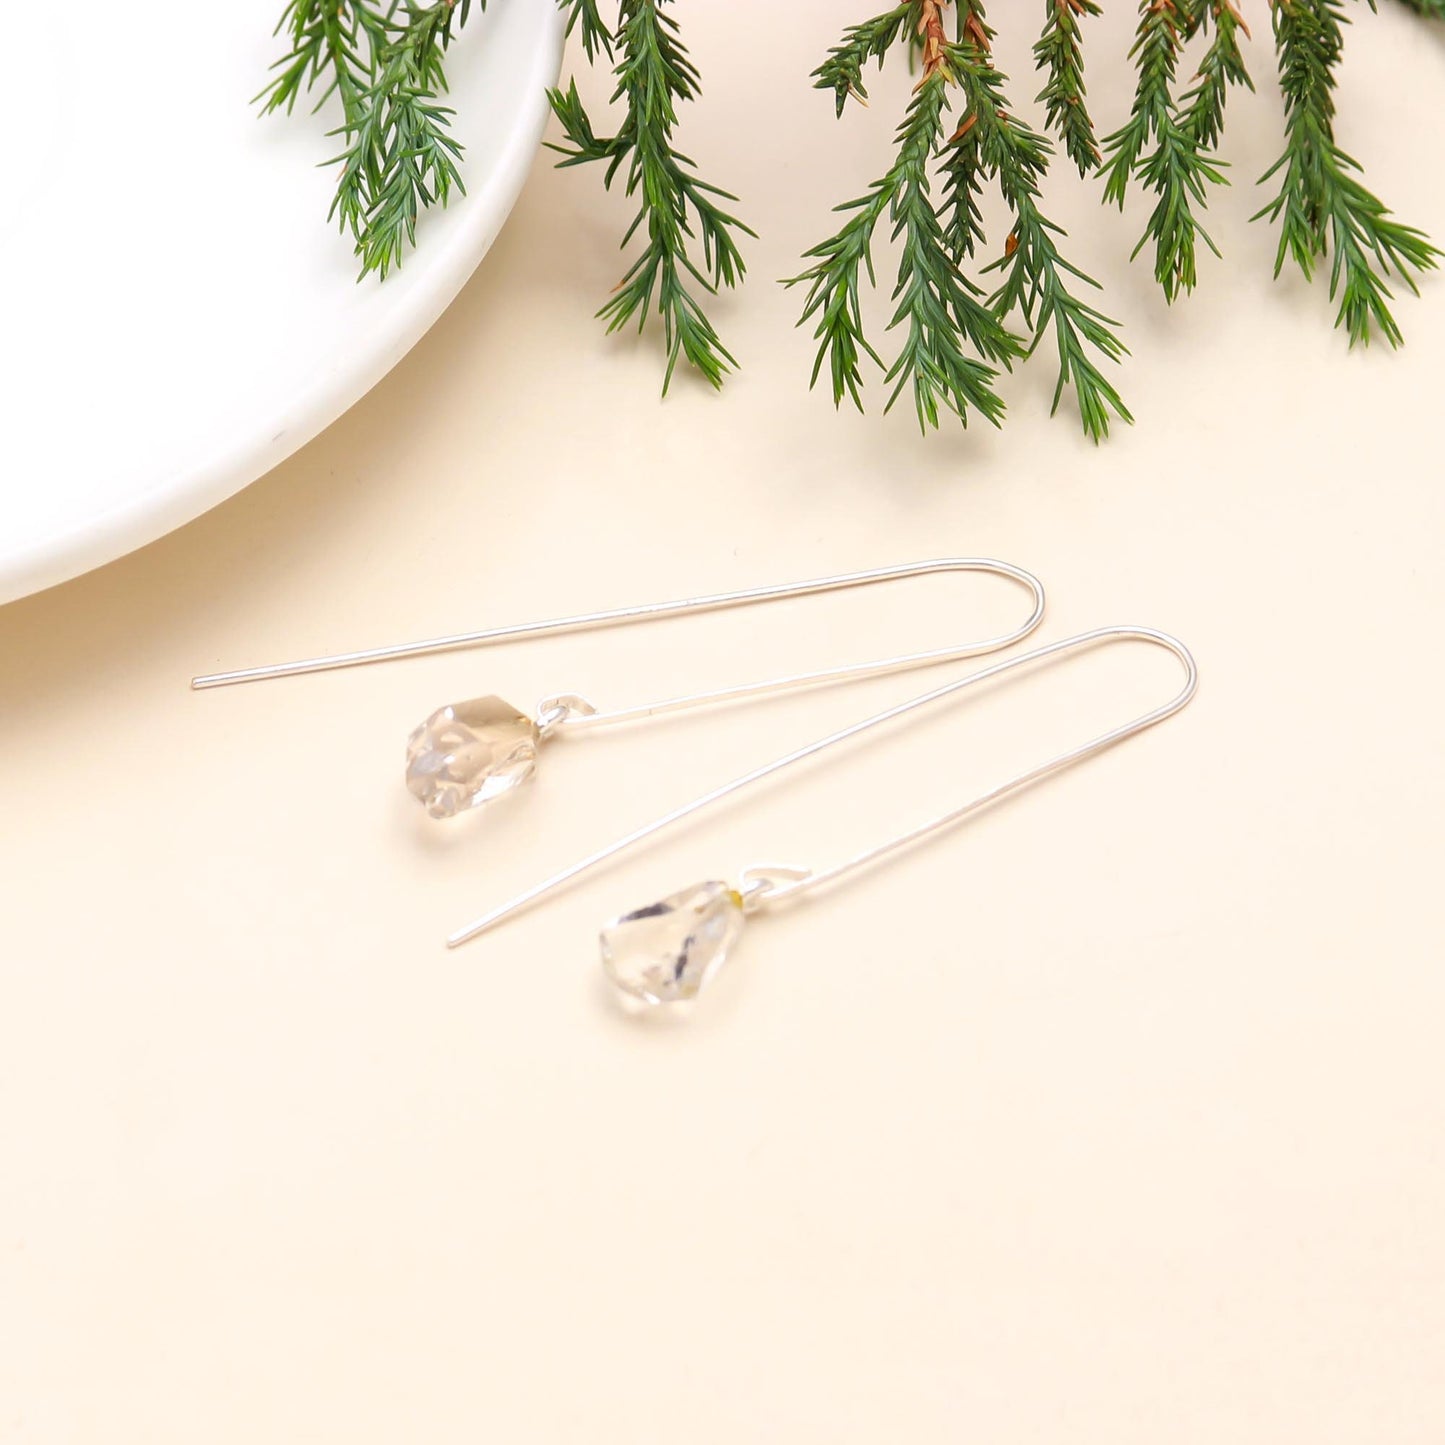 Solid 925 Sterling Silver Herkimer Diamond Earrings. Birthday/ Anniversary,April Birth Stone, Silver, Rose Gold & Gold Plating. Gift for her